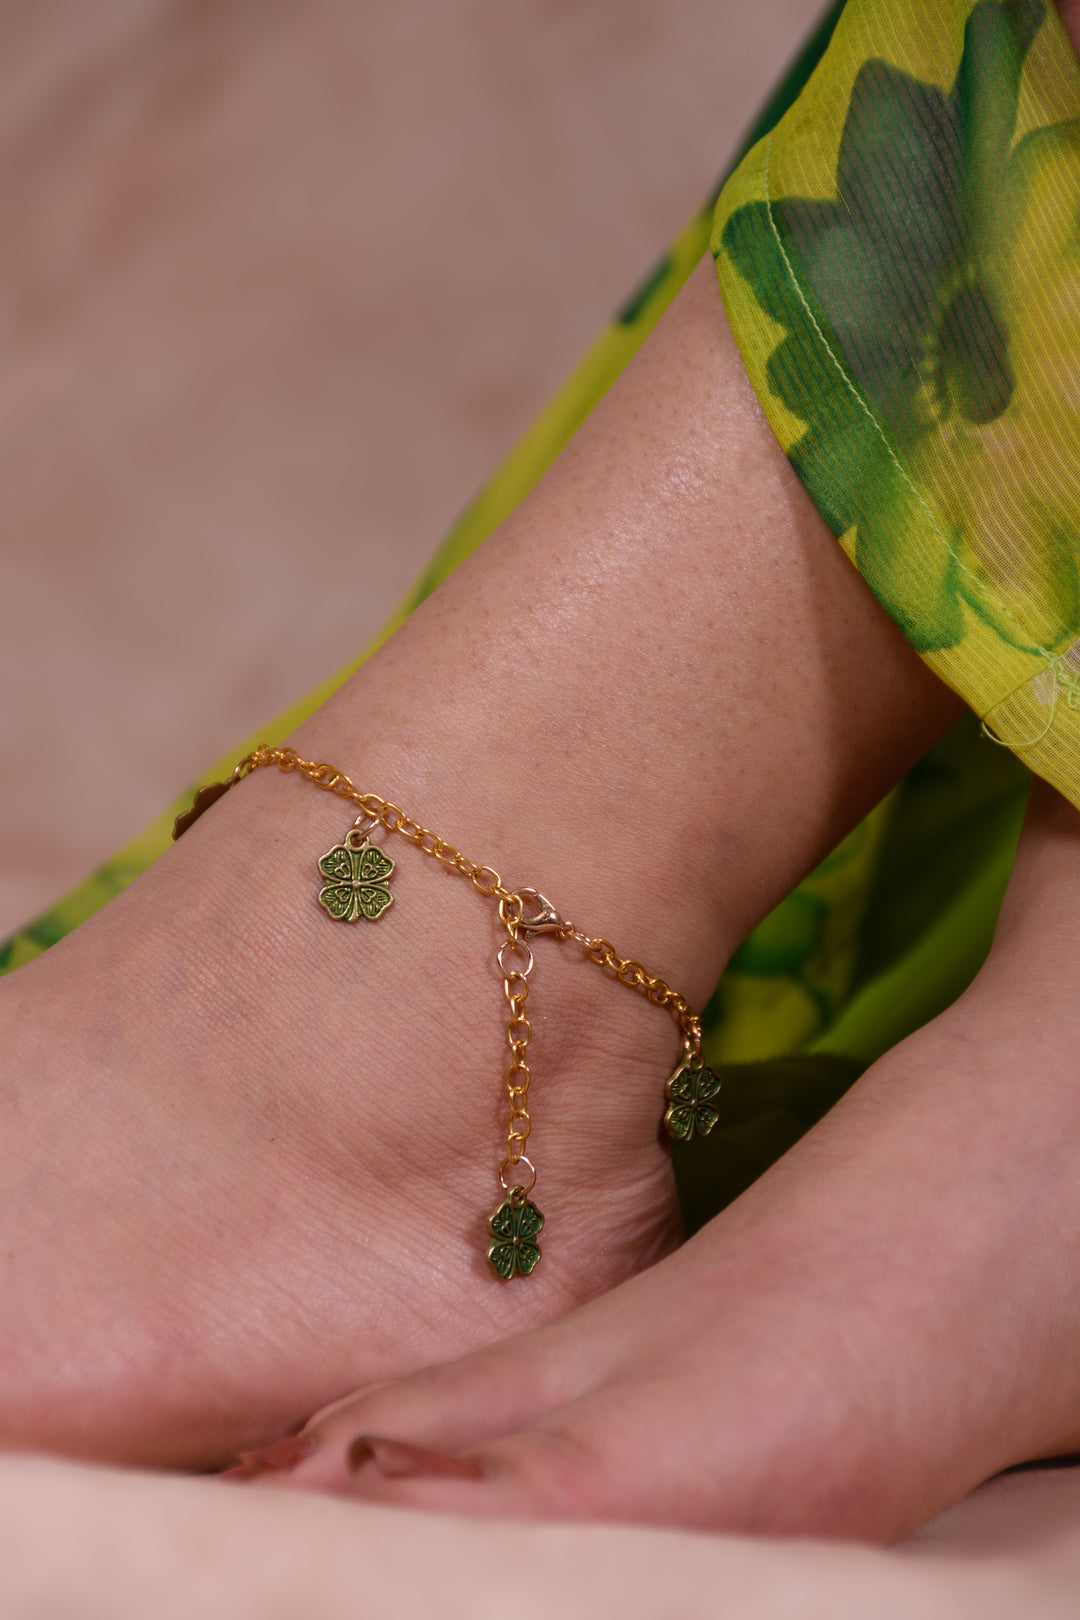 Golden Polish Metal Chain Anklet Styled With Flower Shaped Metal Charms